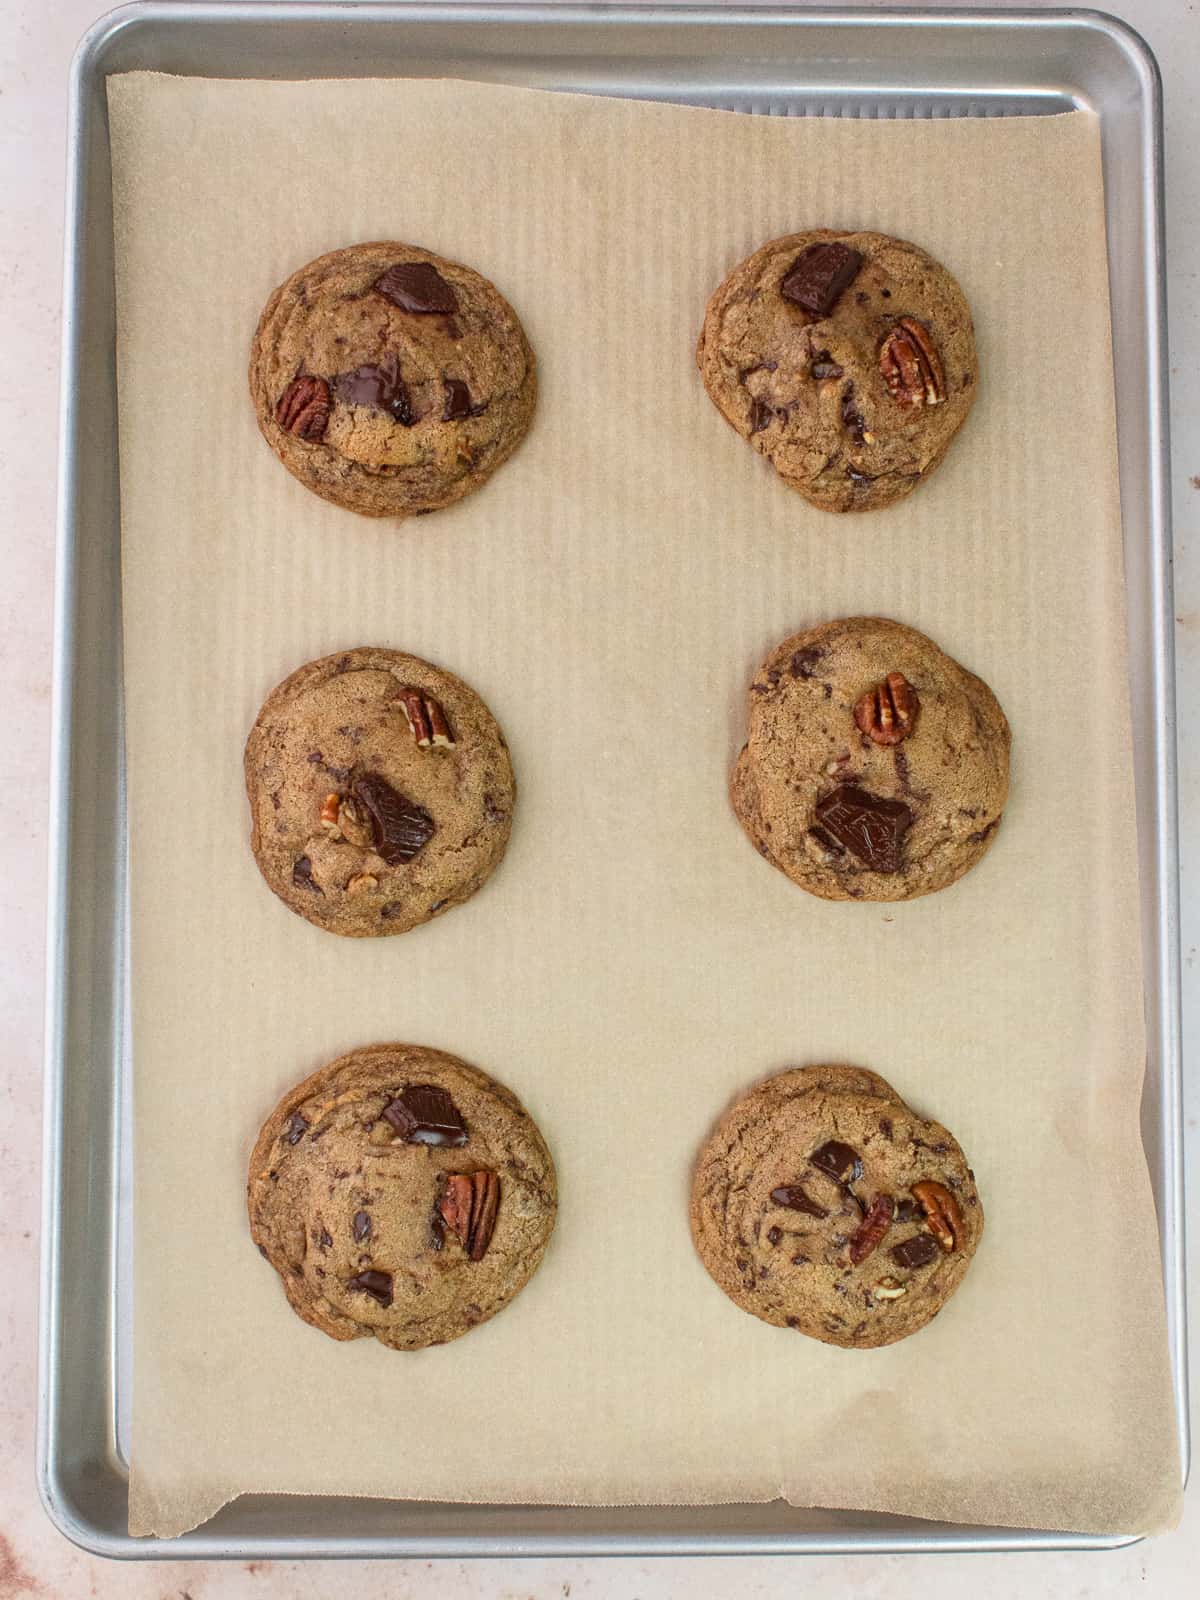 Baked cookies on parchment lined cookie sheet